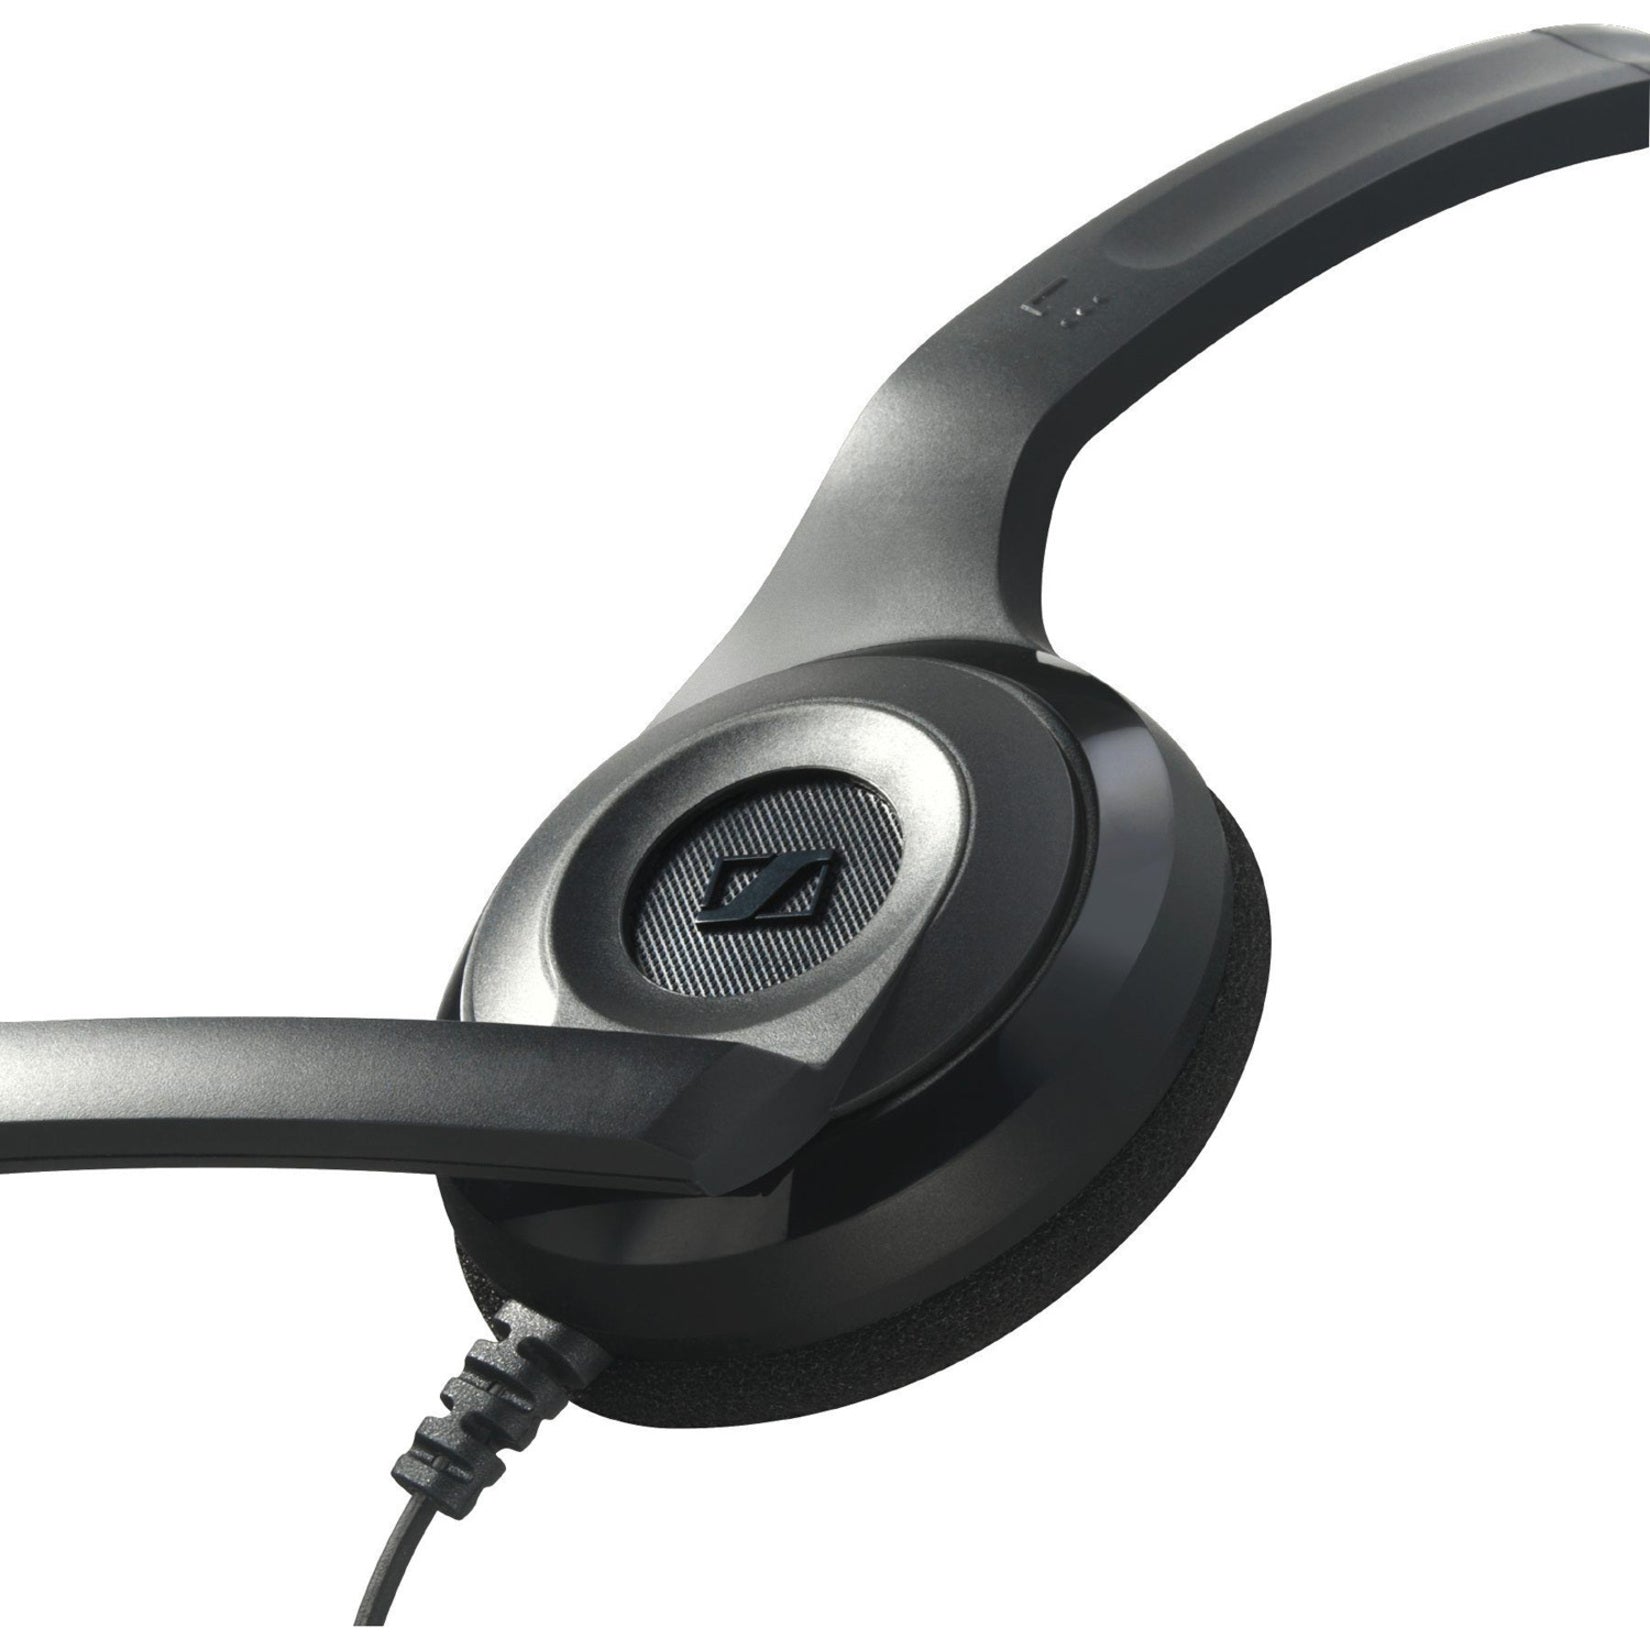 Sennheiser 504194 PC 2 CHAT Headset, Over-the-head Monaural Wired Headset with Noise Cancelling Microphone